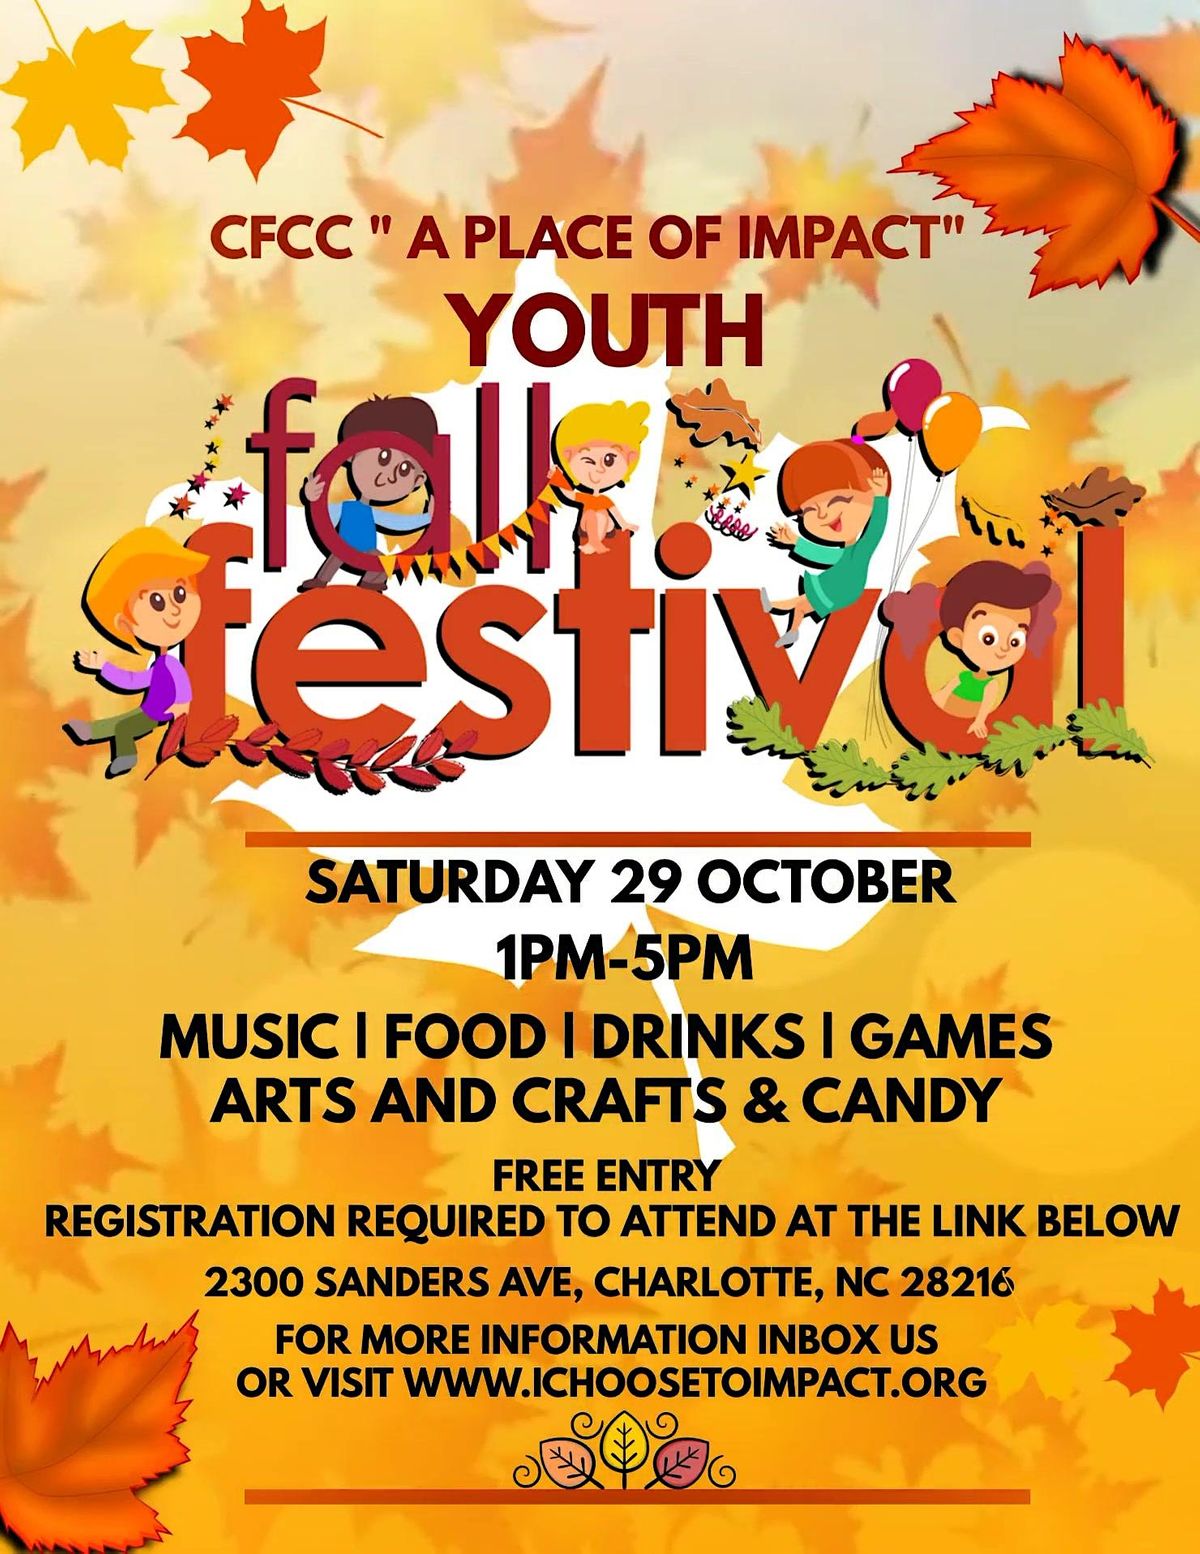 YOUTH FALL FESTIVAL CFCC “A PLACE OF IMPACT” 2300 Sanders Ave